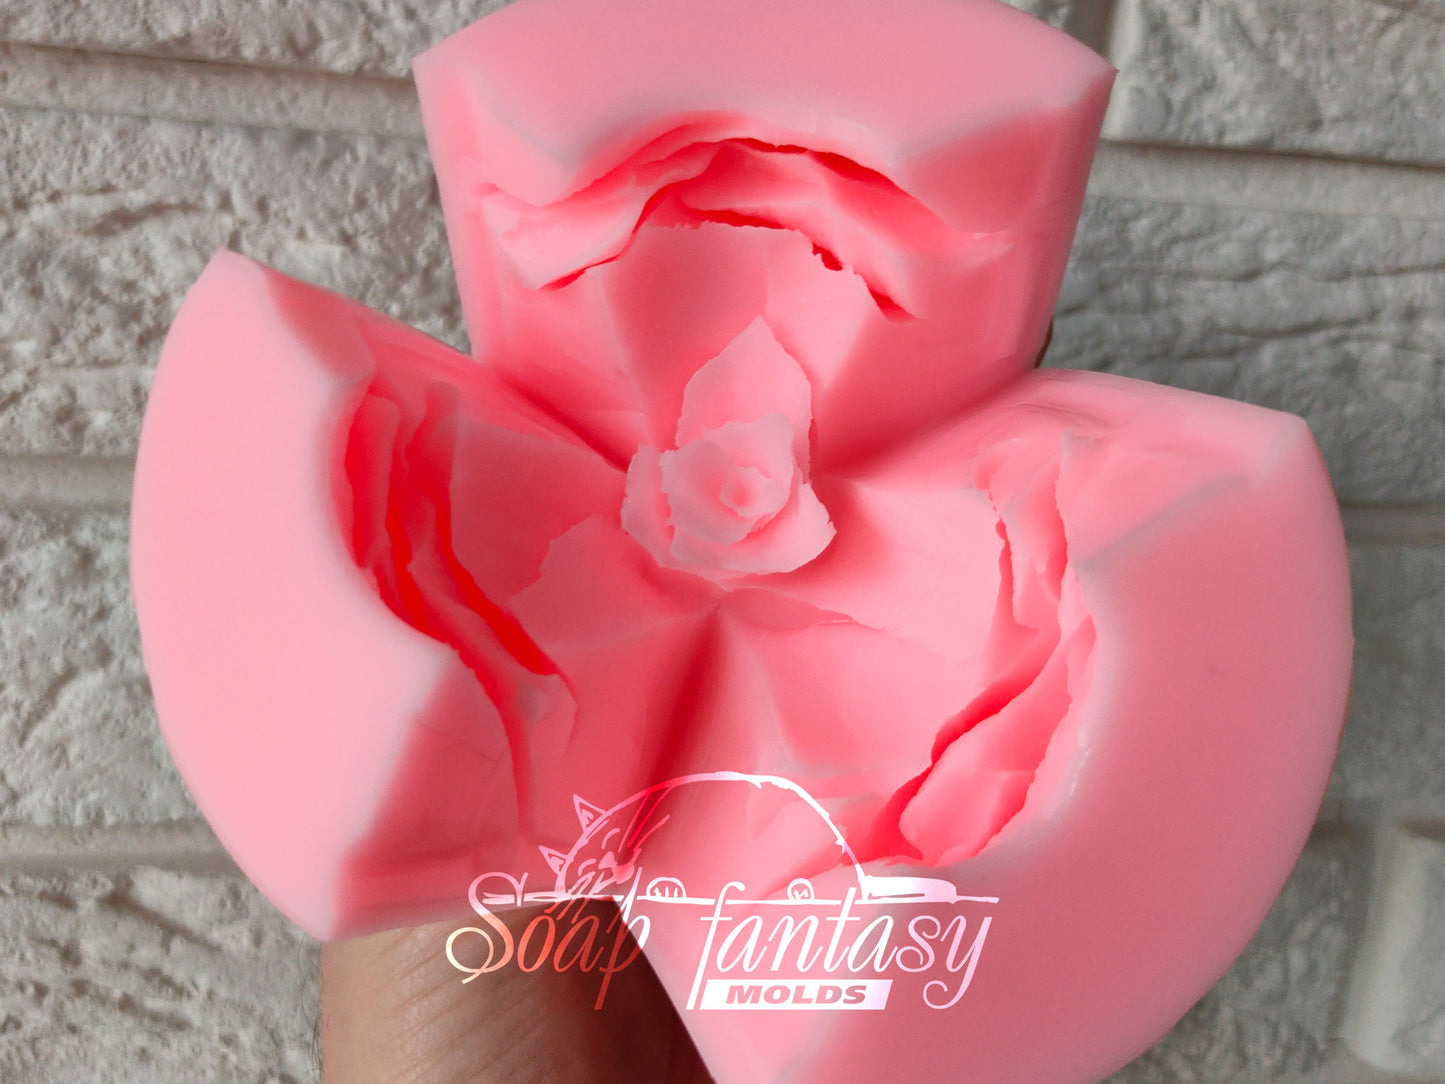 Big rose "Sun City" silicone mold for soap making